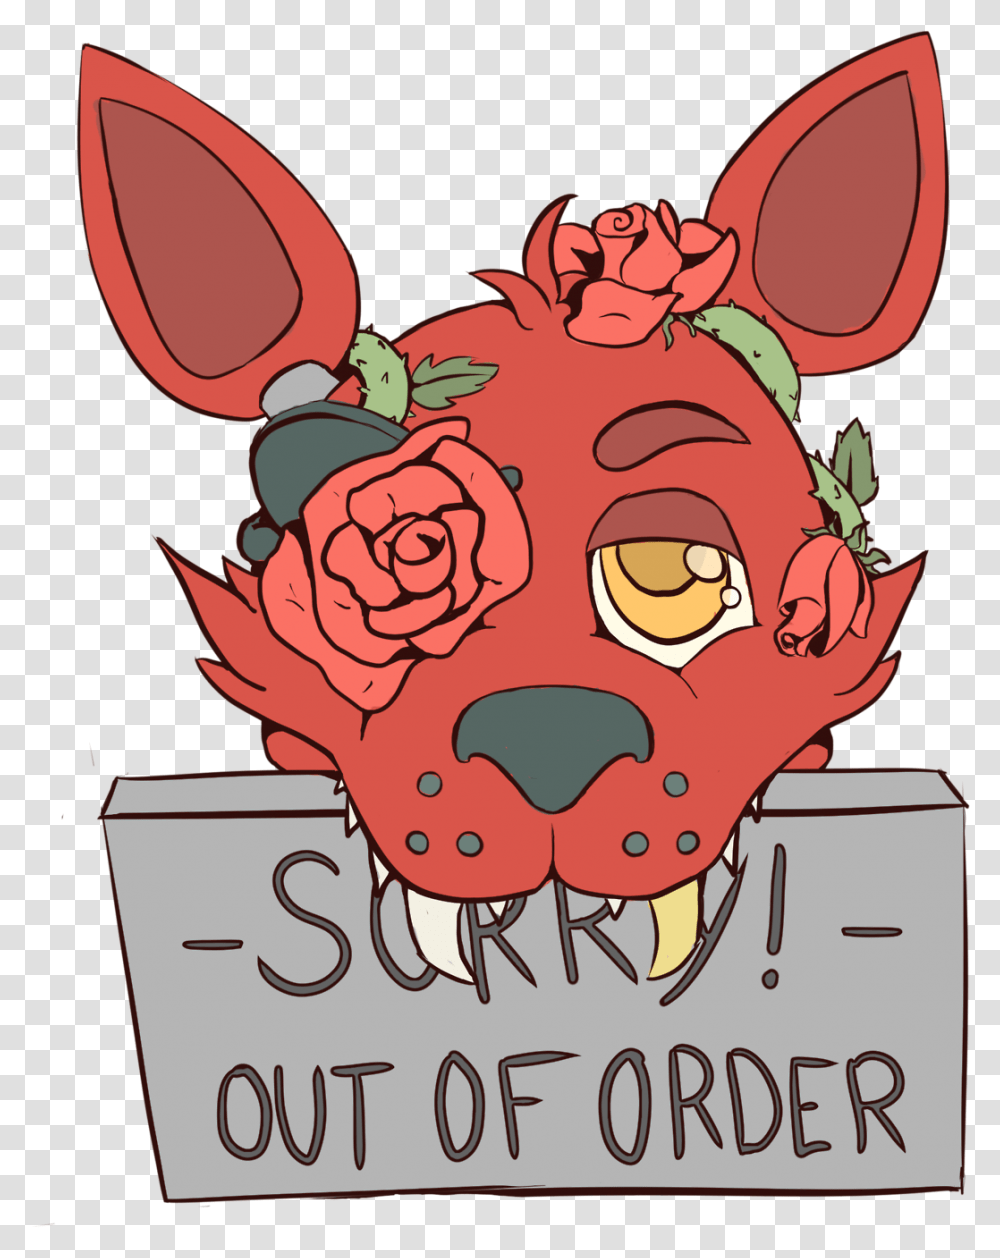 Fnaf Foxy Out Of Order, Poster, Advertisement, Label Transparent Png